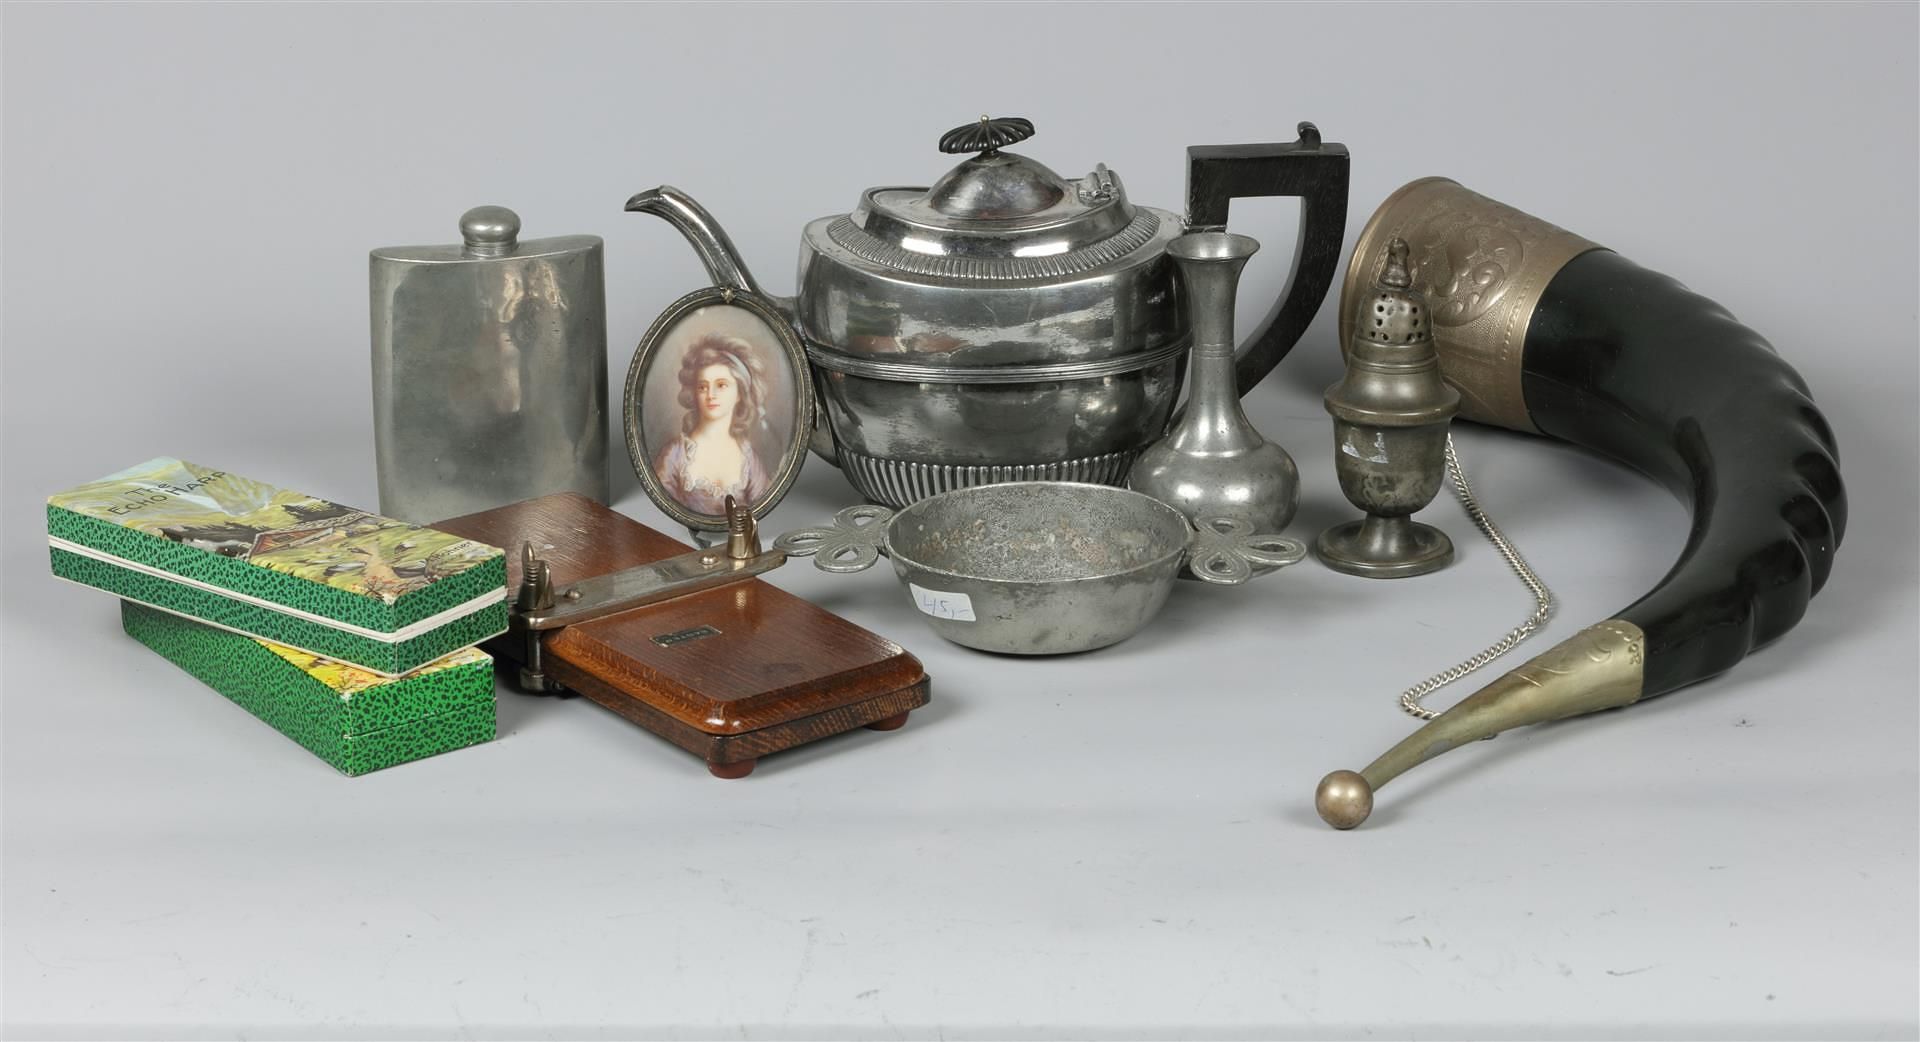 A lot miscellaneous items, including a silver-plated teapot, and two harmonicas.